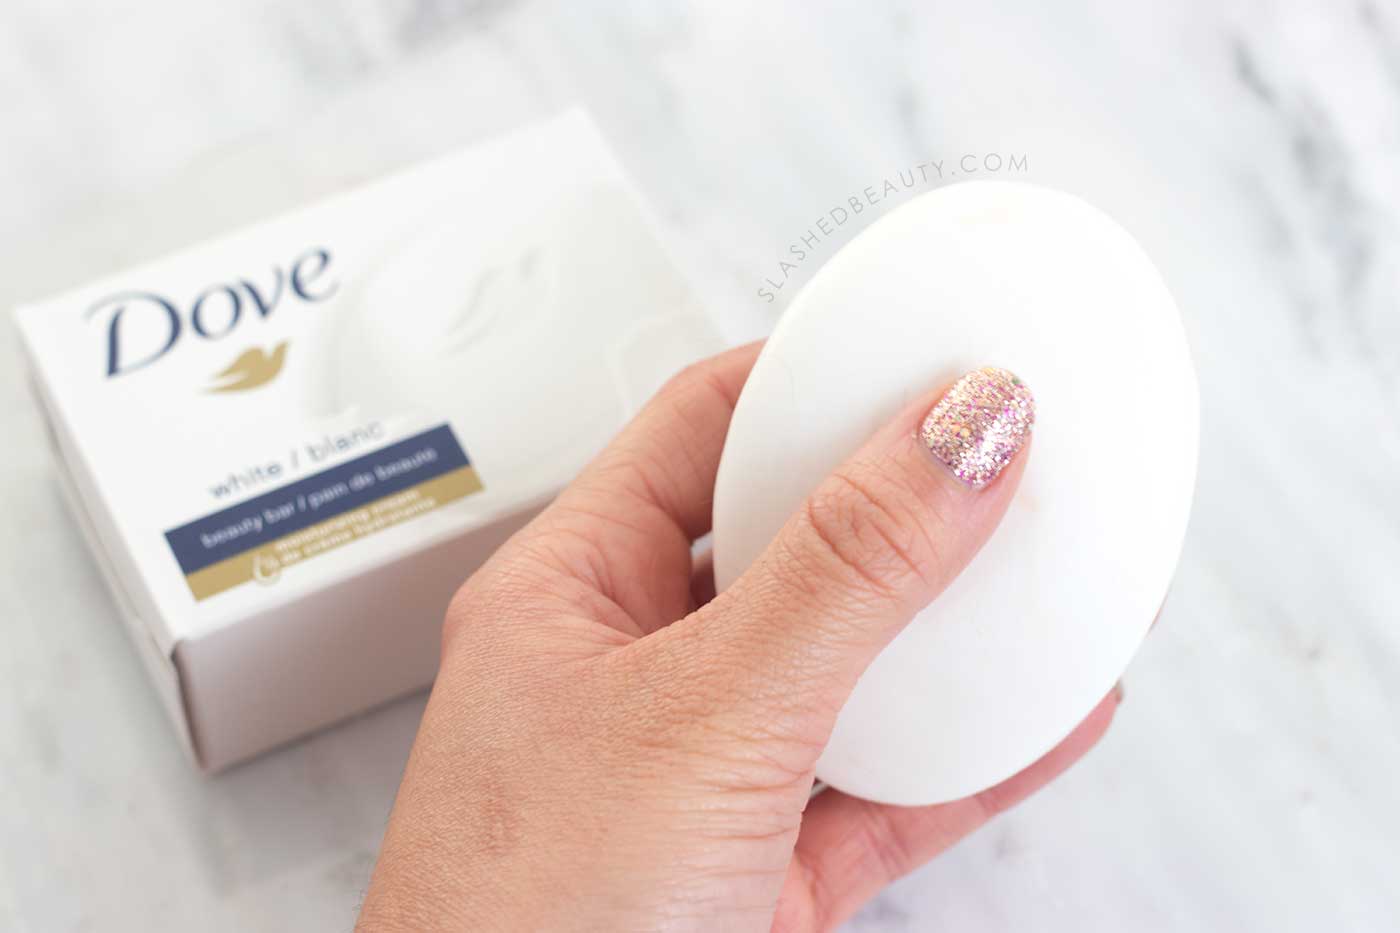 Dove Beauty Bar: Moisturizing Hand Soap | 5 Best Products for Dry Hands from Washing Too Much | Slashed Beauty